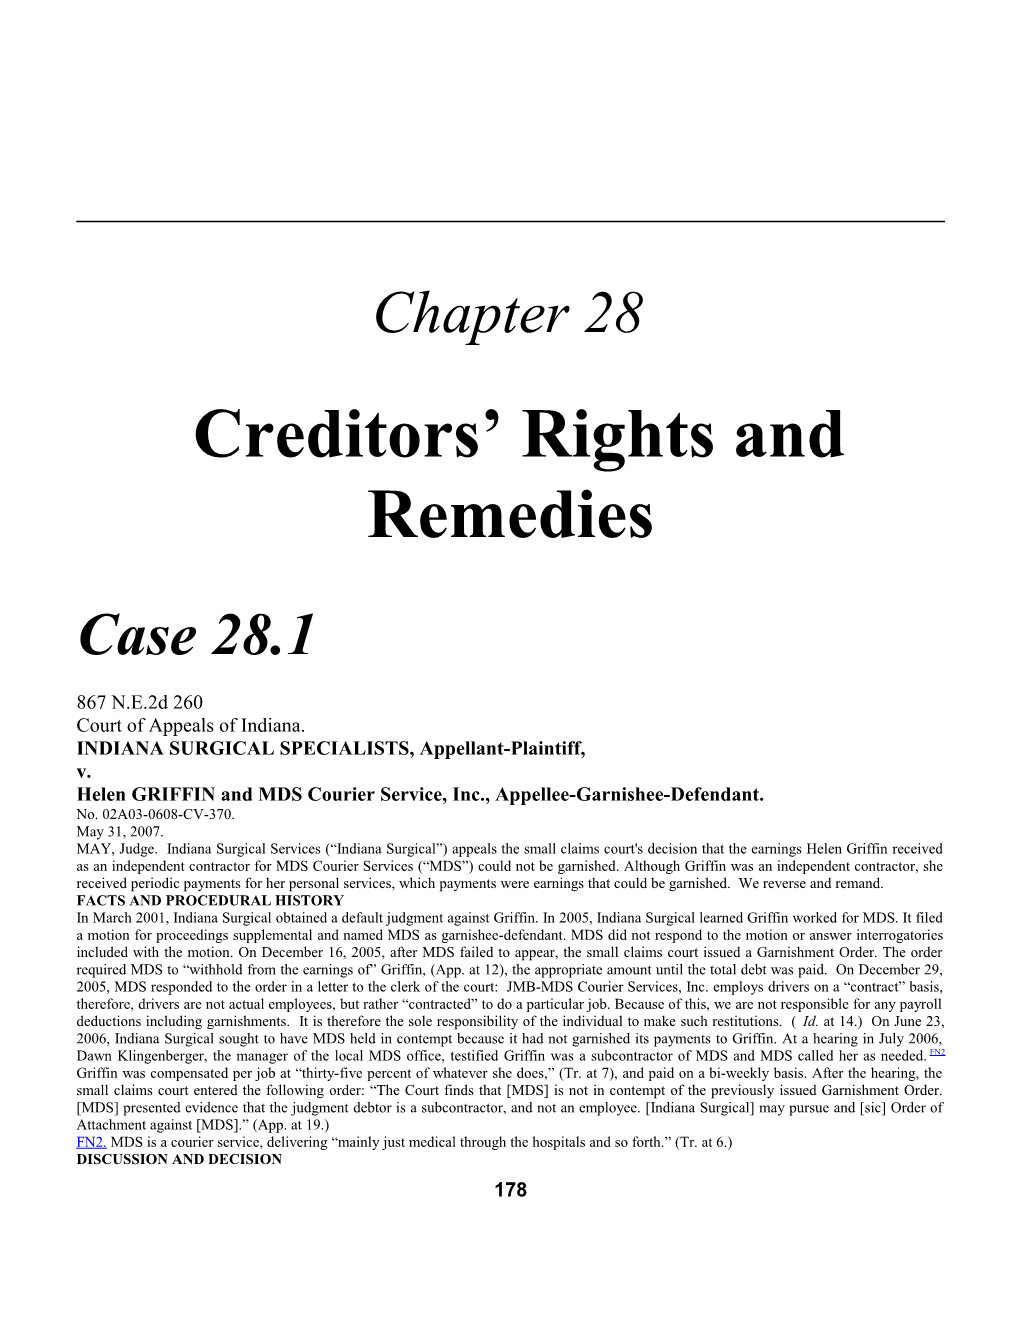 Chapter 28: Creditors Rights and Remedies 1